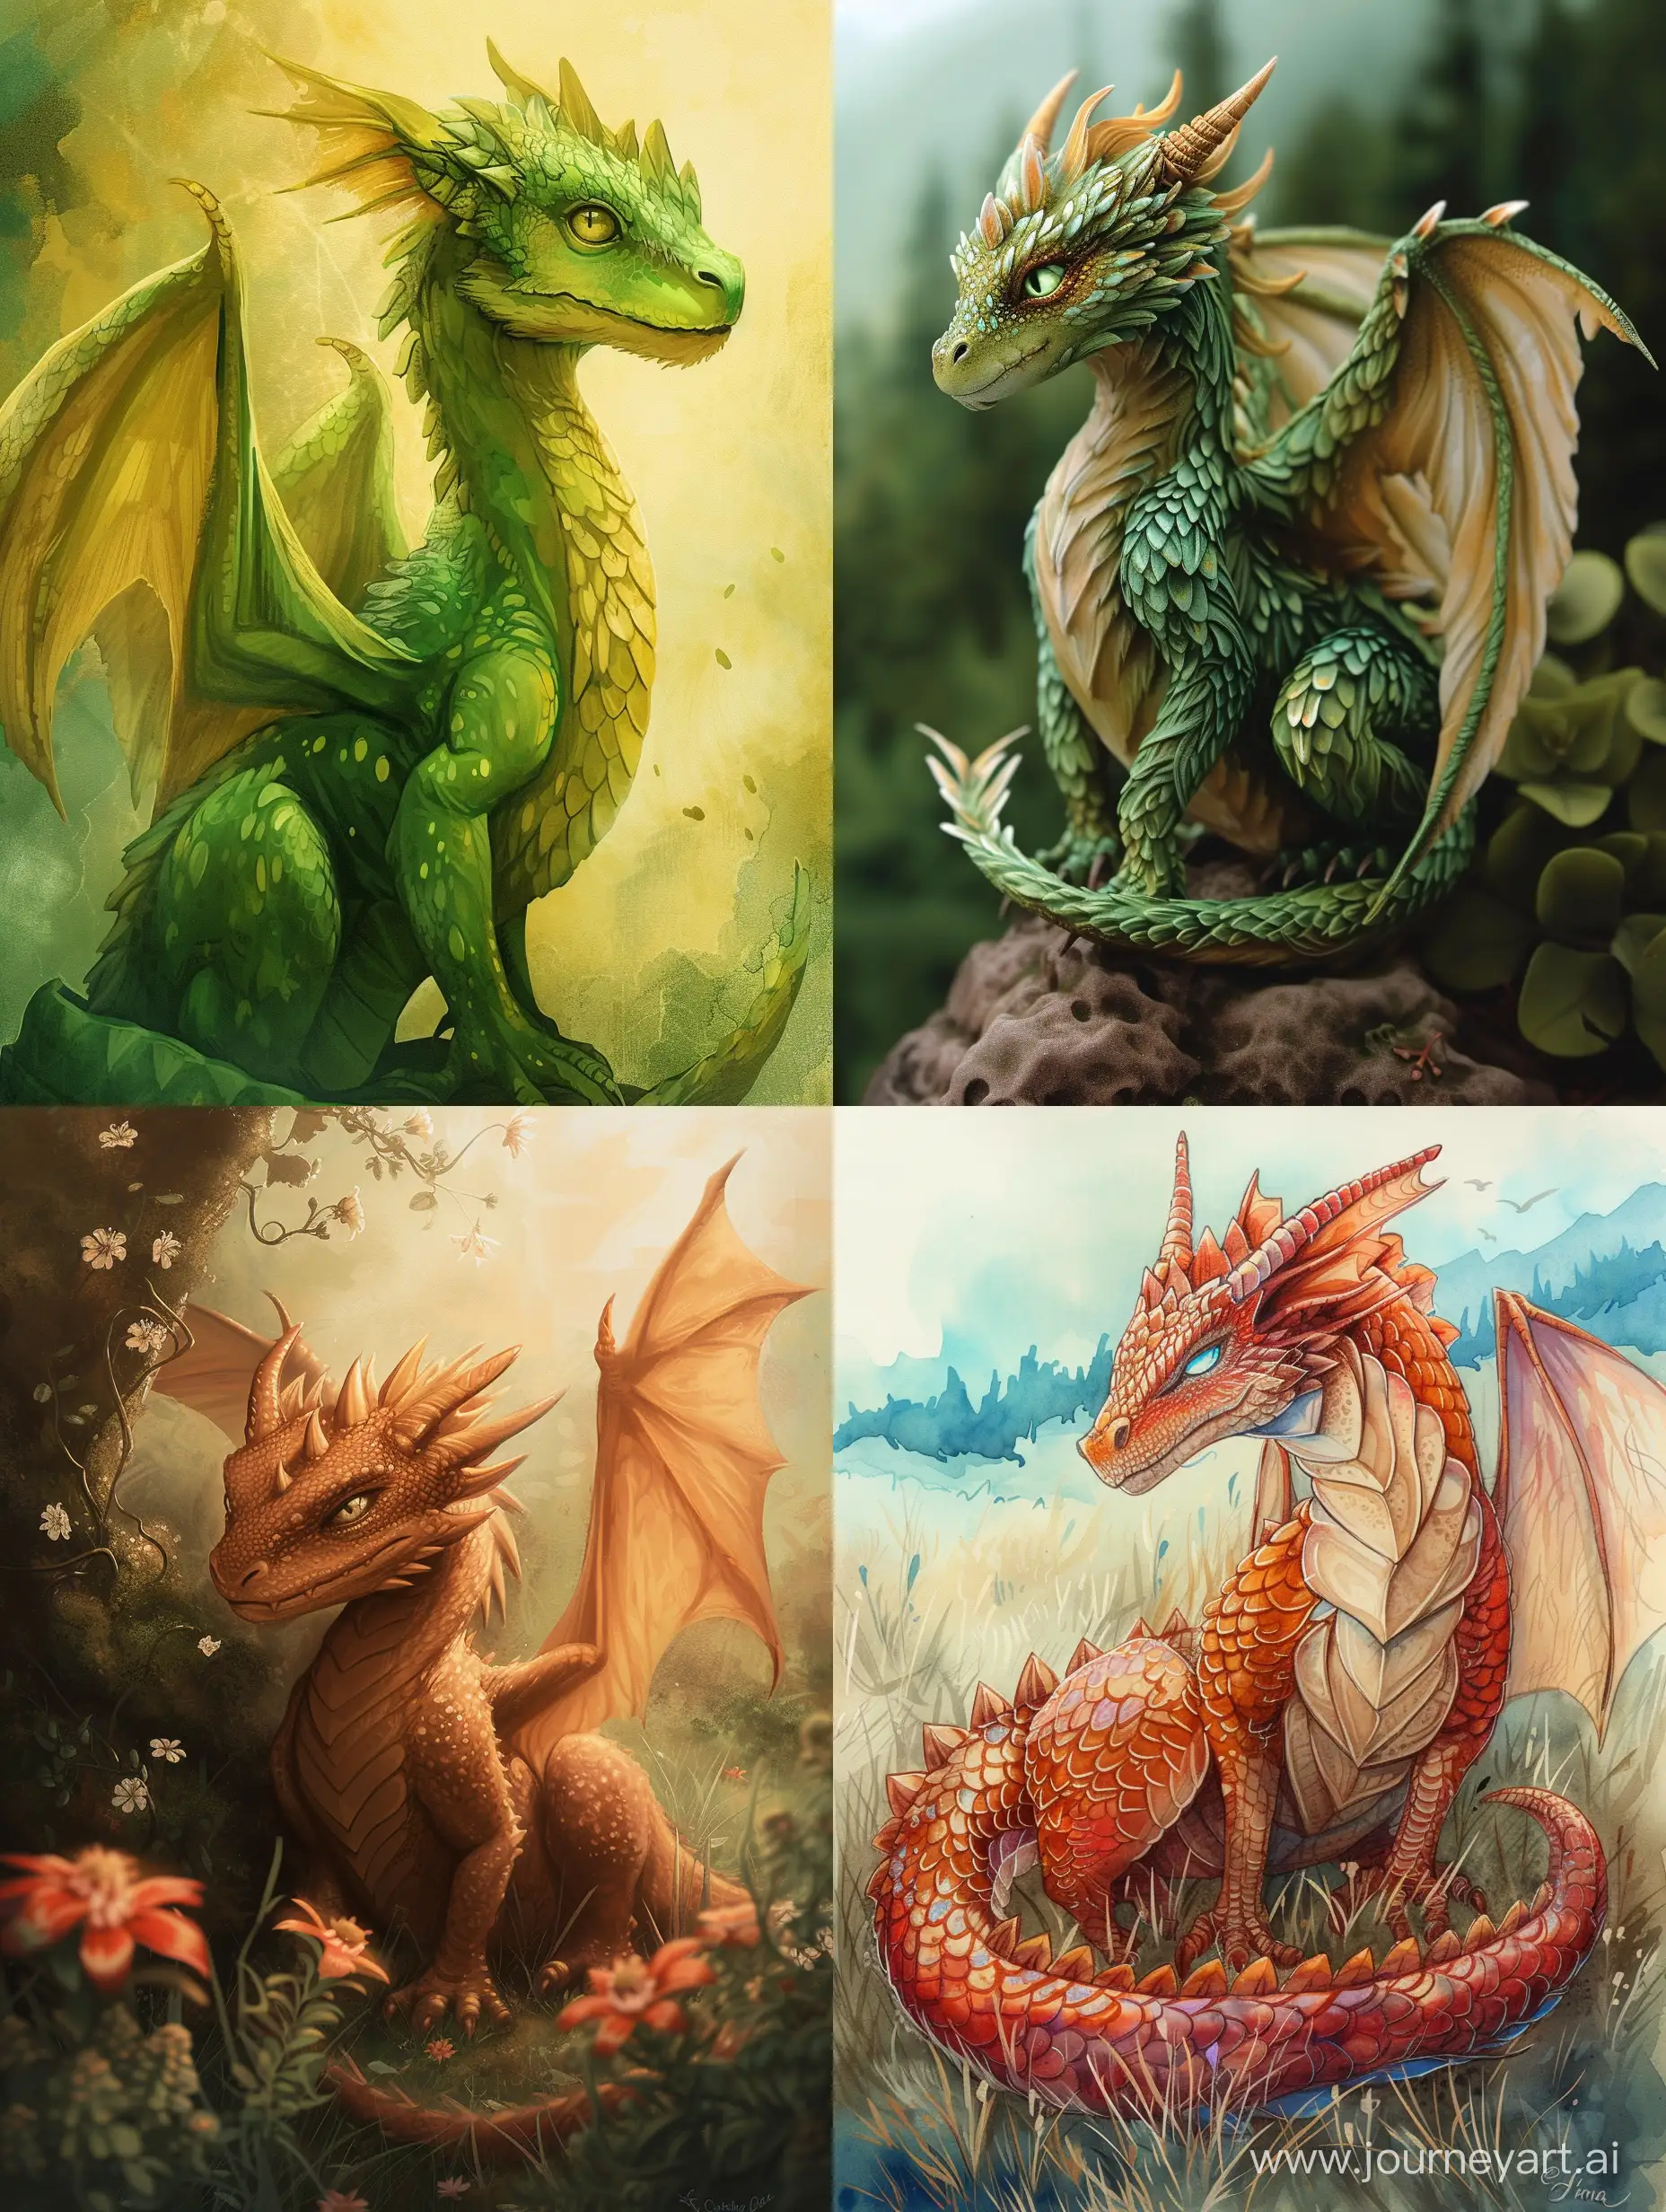 Enchanting-Dragon-Art-with-Vibrant-Colors-in-a-34-Aspect-Ratio